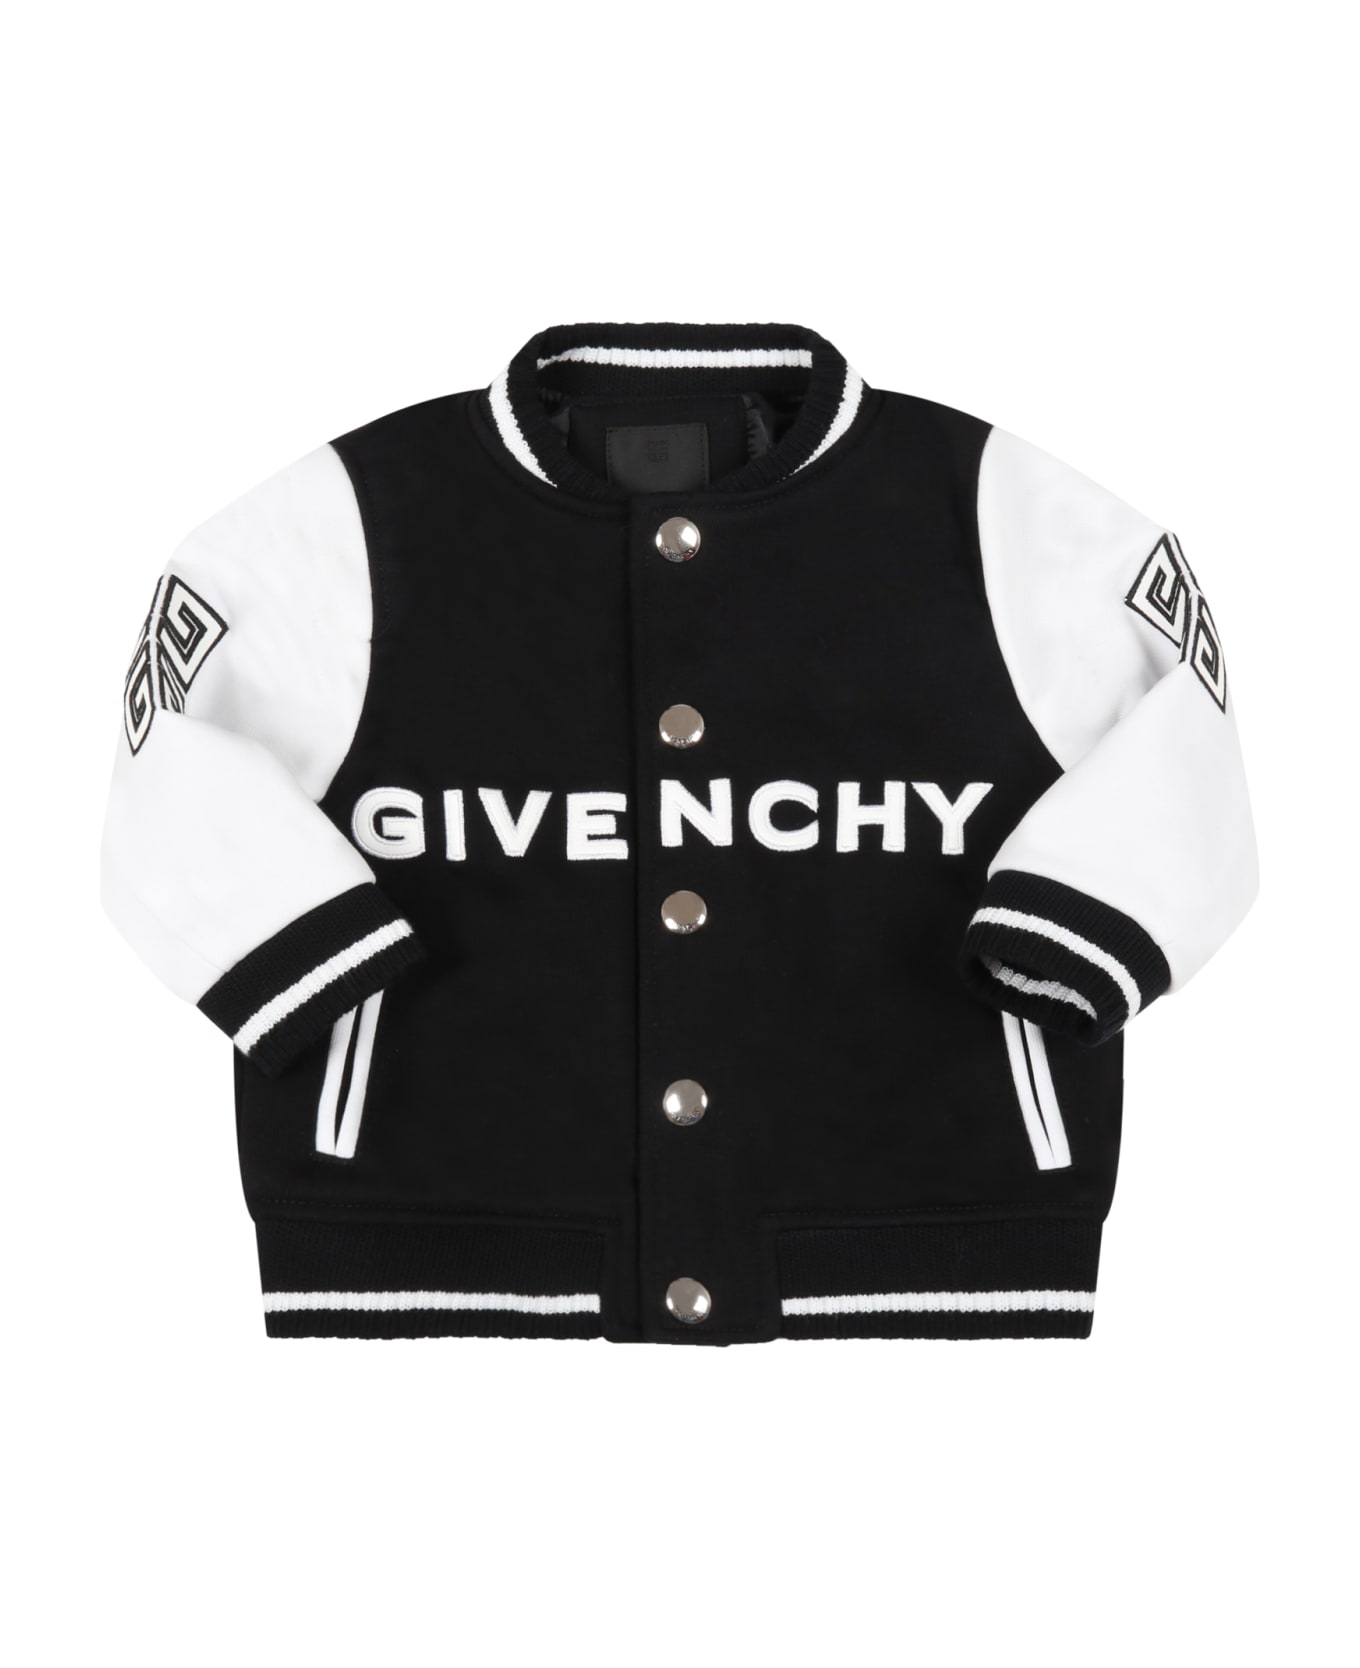 Givenchy Black Jacket For Baby Kids With White Logo - Multicolor